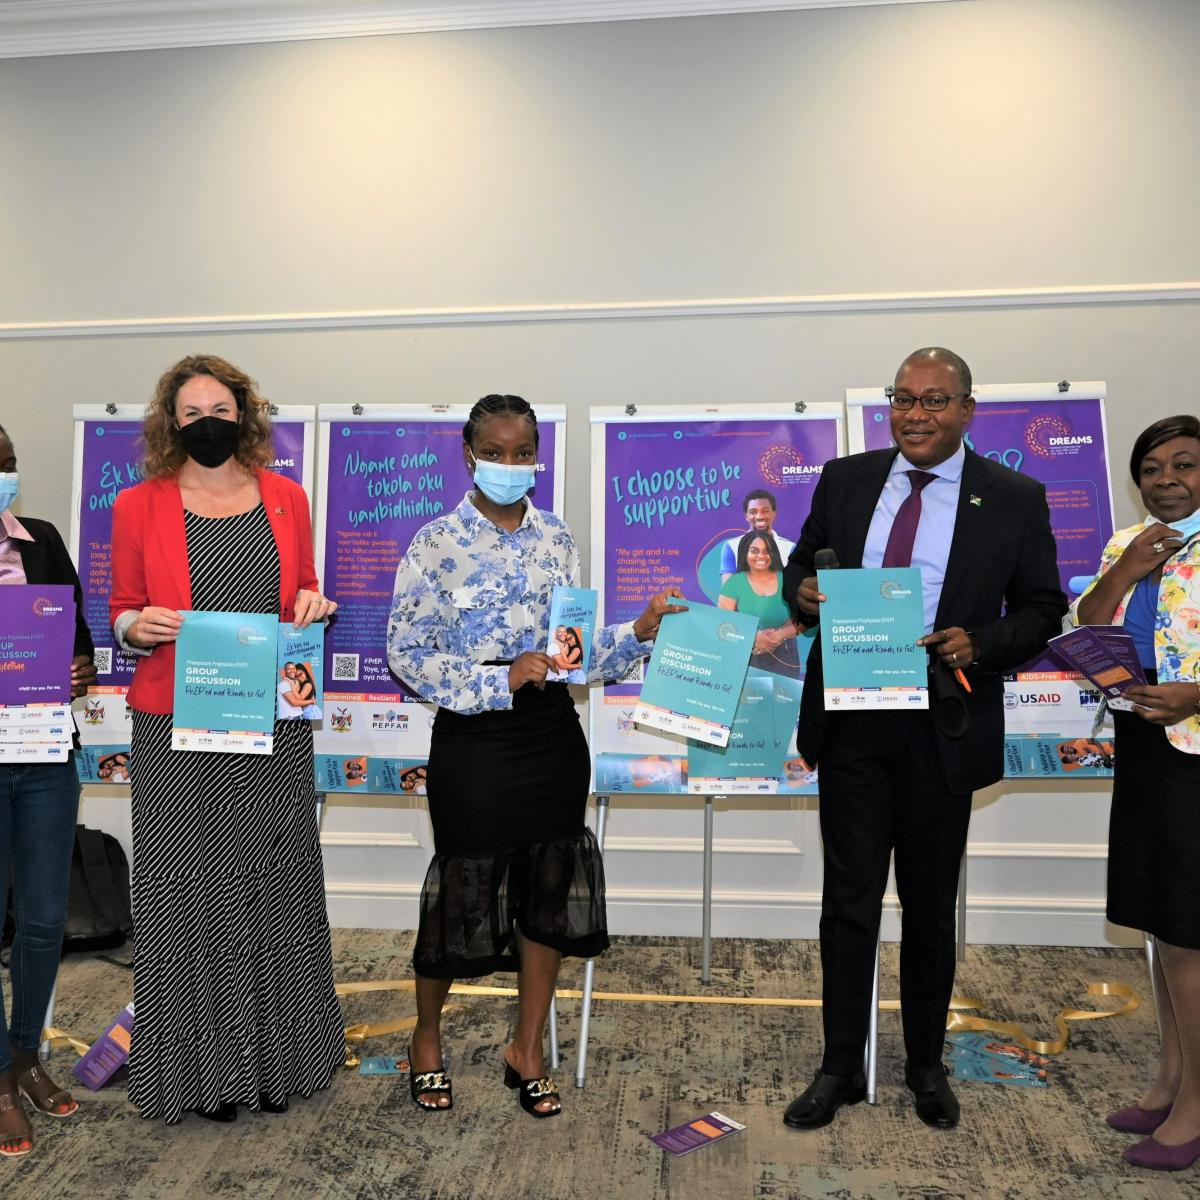 Presenting the new PrEP public awareness posters and flyers (from left to right): Johanna Shinana (DREAMS Ambassador), Nicole Miller (DREAMS Coordinator, USAID), Adelheid Gowases (DREAMS Ambassador), Ben Nangombe (Executive Director, MOHSS), Rosalia Indongo (Project Hope, Country Director), Bernadette Harases (DREAMS Chief of Party).